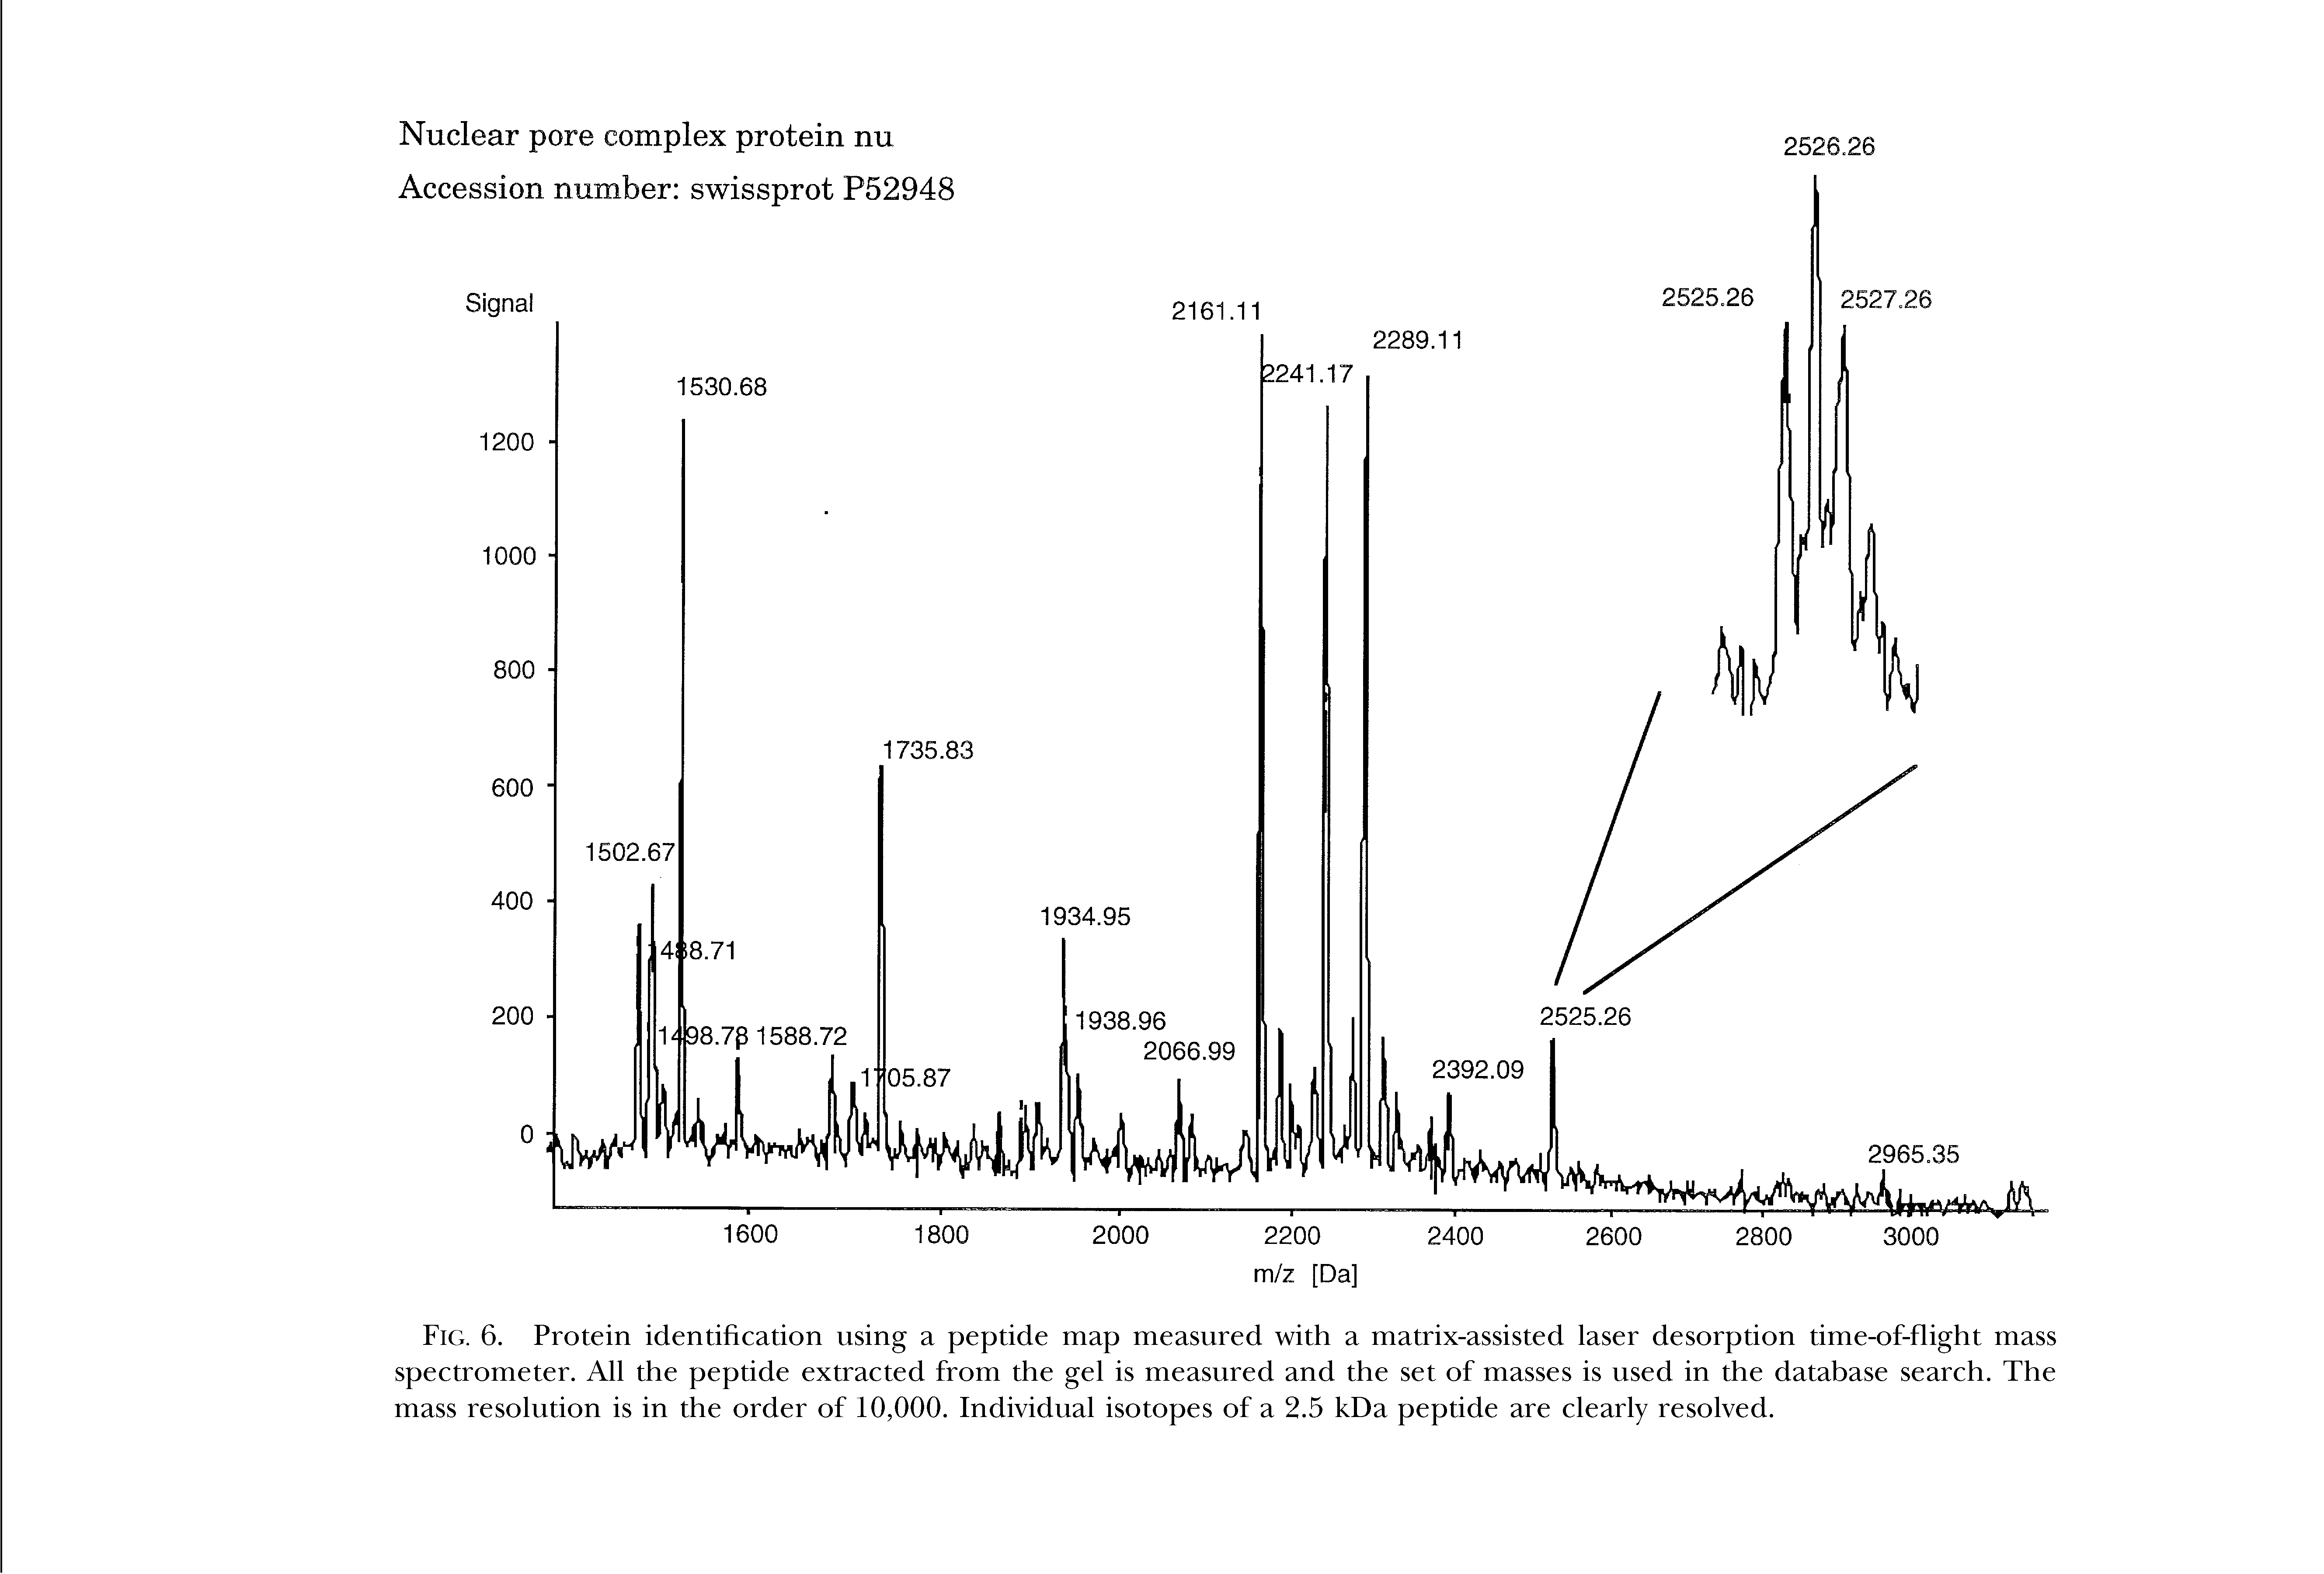 Fig. 6. Protein identification using a peptide map measured with a matrix-assisted laser desorption time-of-flight mass spectrometer. All the peptide extracted from the gel is measured and the set of masses is used in the database search. The mass resolution is in the order of 10,000. Individual isotopes of a 2.5 kDa peptide are clearly resolved.